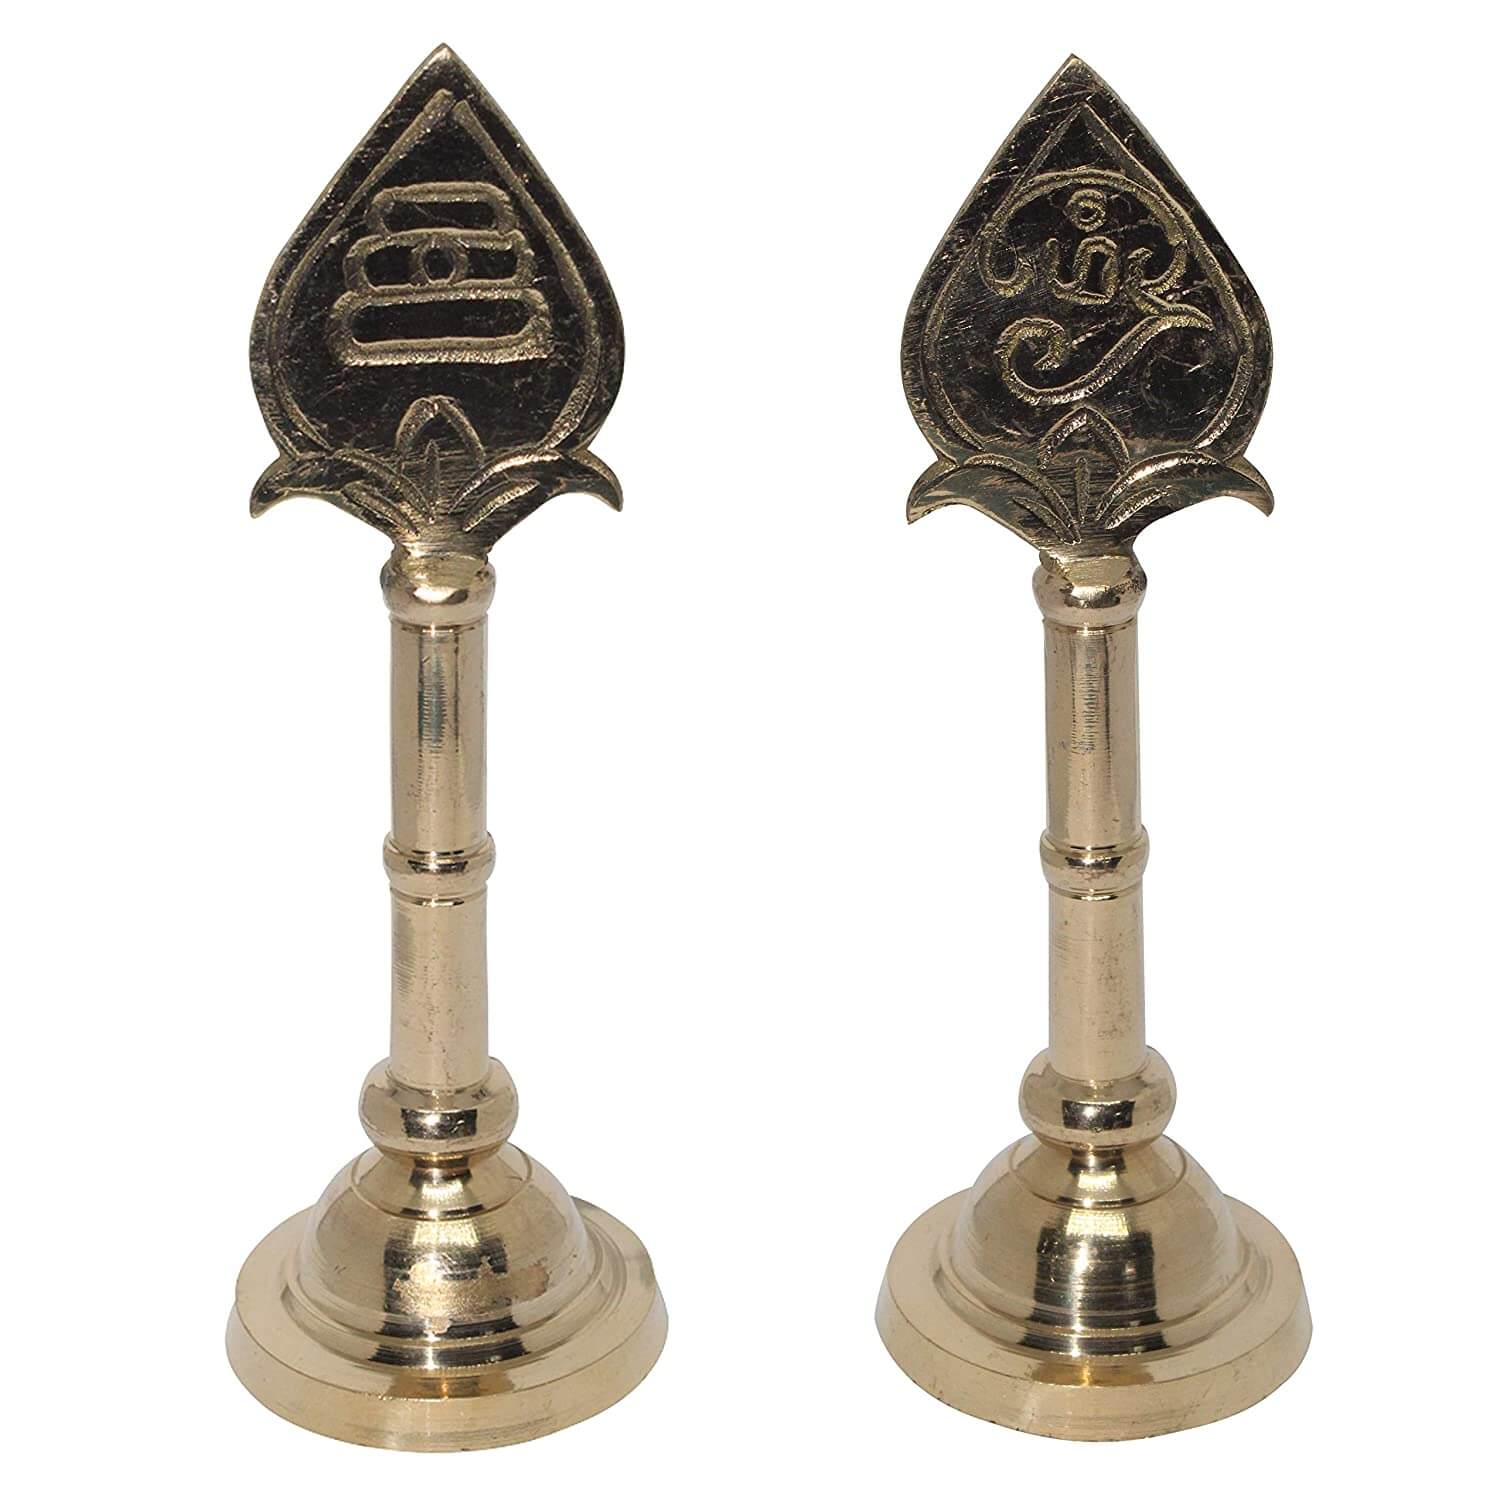 Pack of 2 - Brass Traditional Lord Murugan Stand Vel for Home Worship (Size 14 cm) Mangal Fashions | Indian Home Decor and Craft